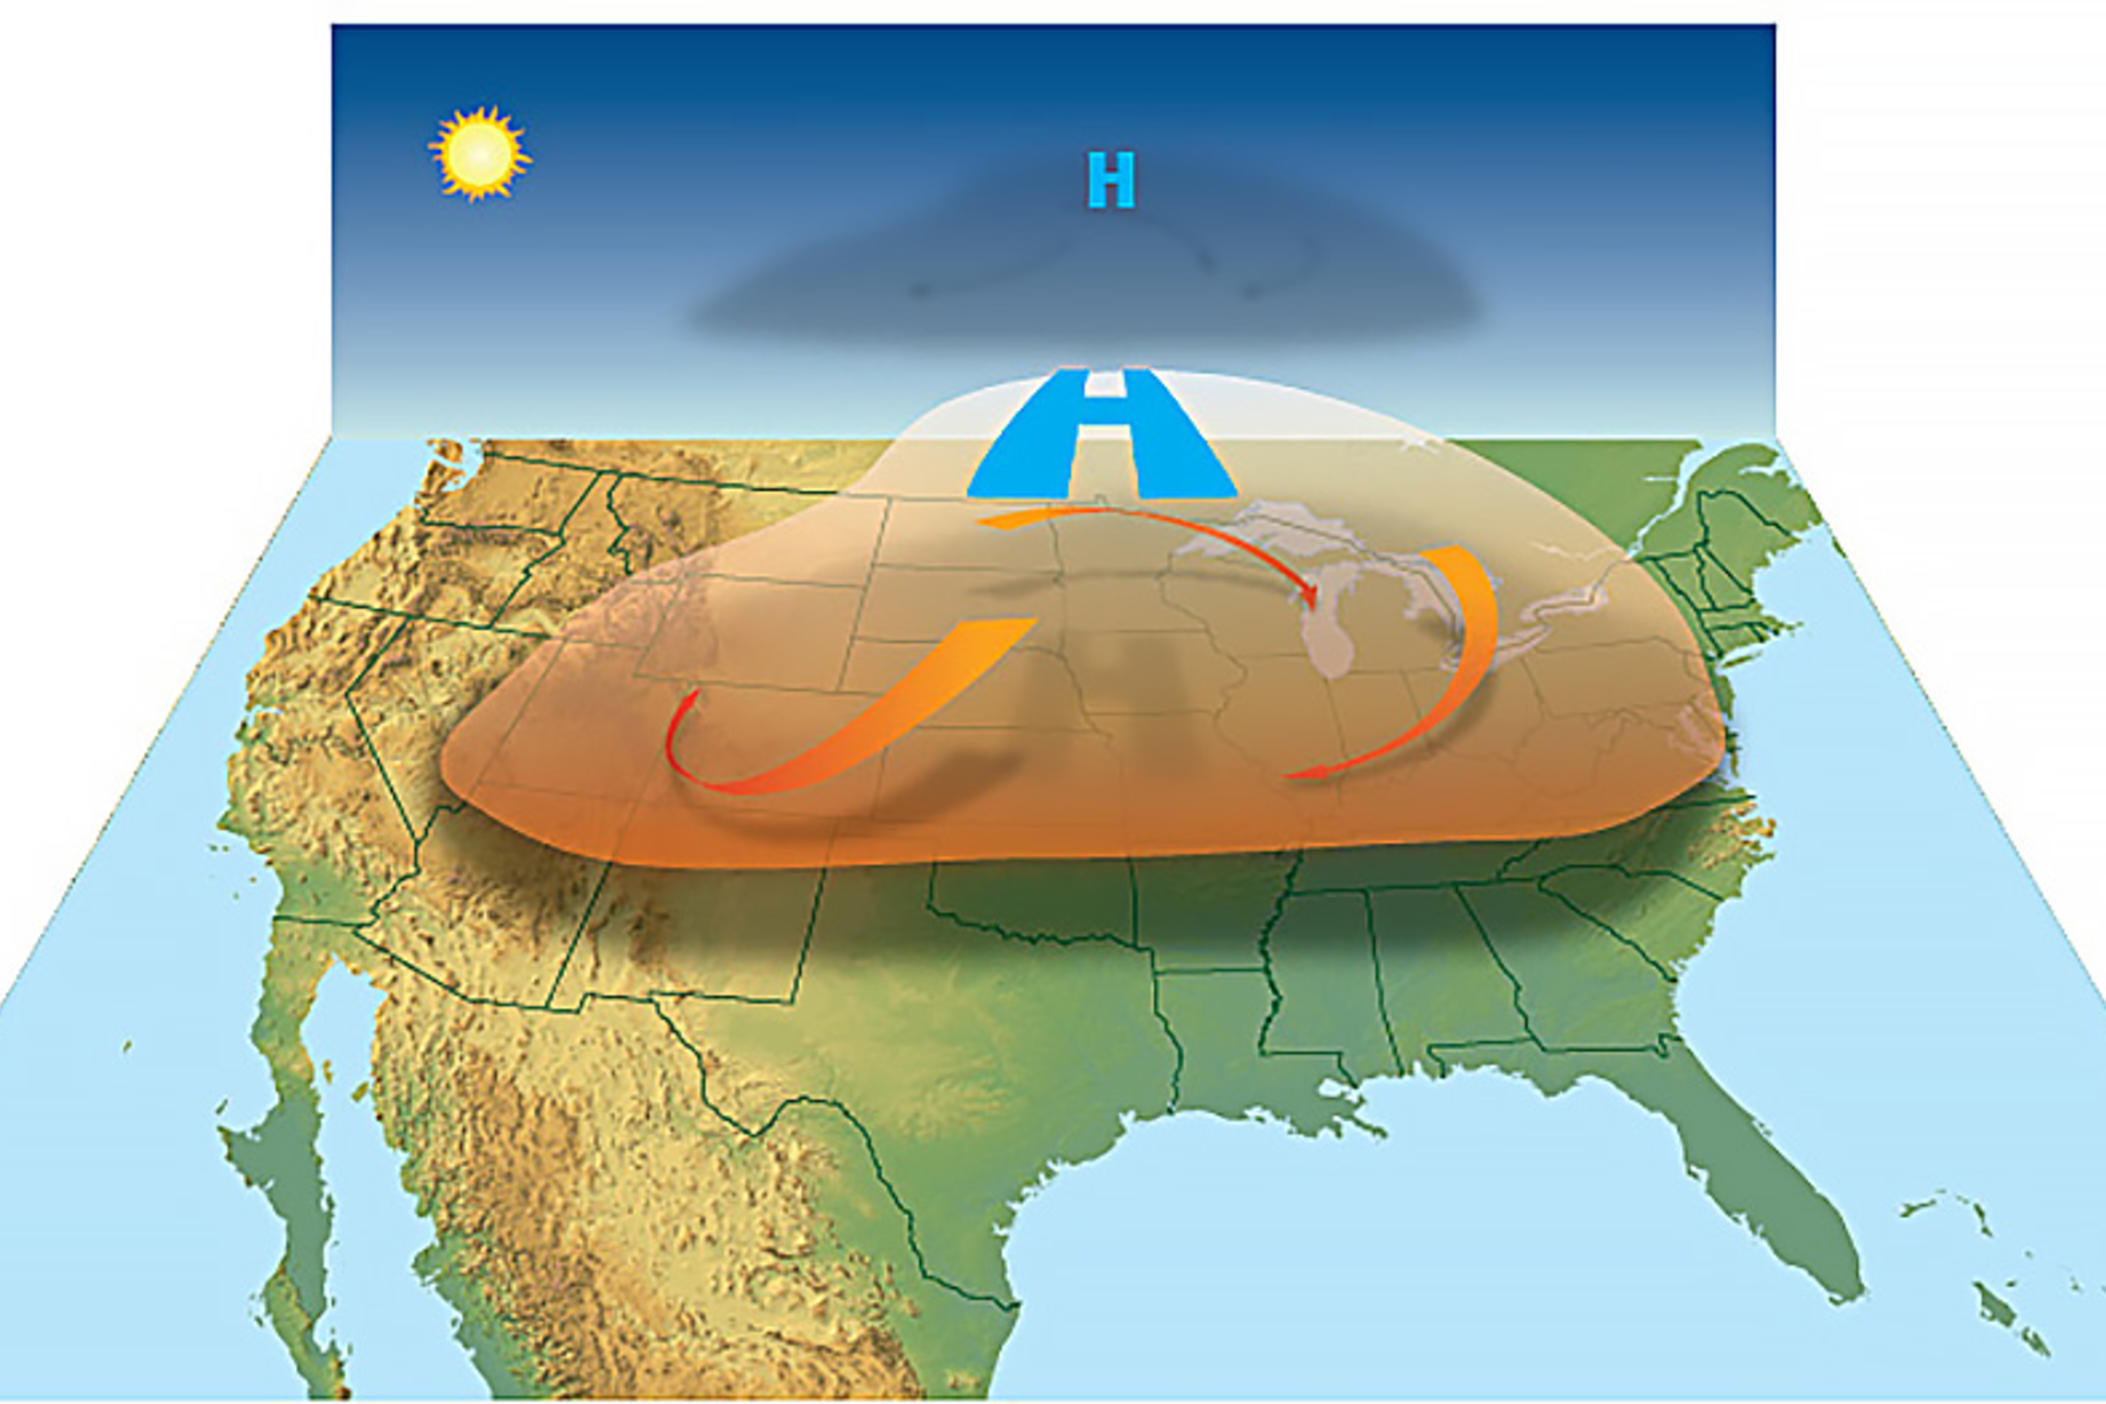 High-pressure circulation in the atmosphere acts like a dome or cap, trapping heat at the surface and favoring the formation of a heat wave.